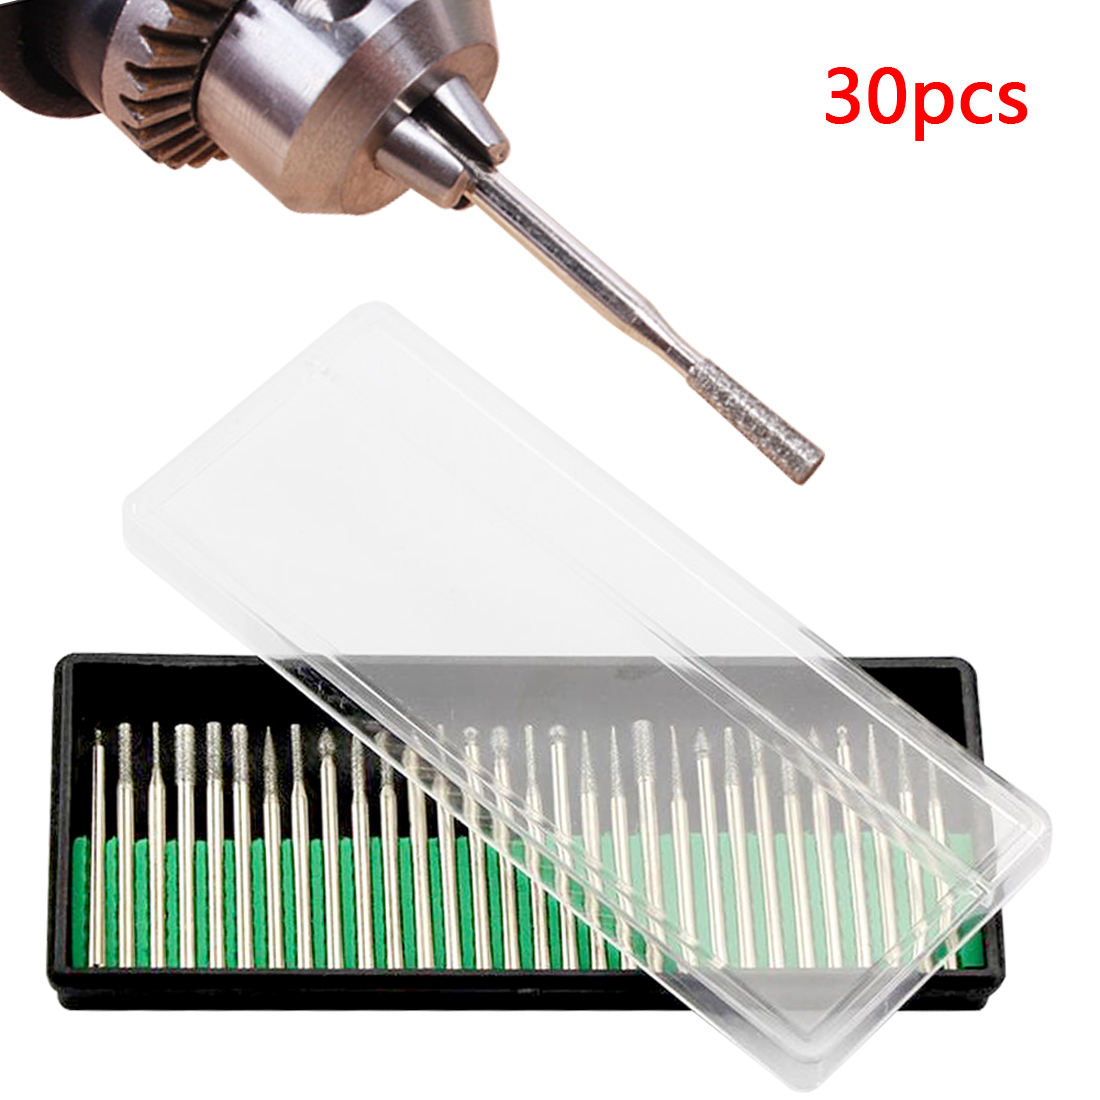 Dremel  ׼ ̾Ƹ Burs Dremel Ÿ  Ұ ̾Ƹ Burs  ׶ε  3mm Shank With Case